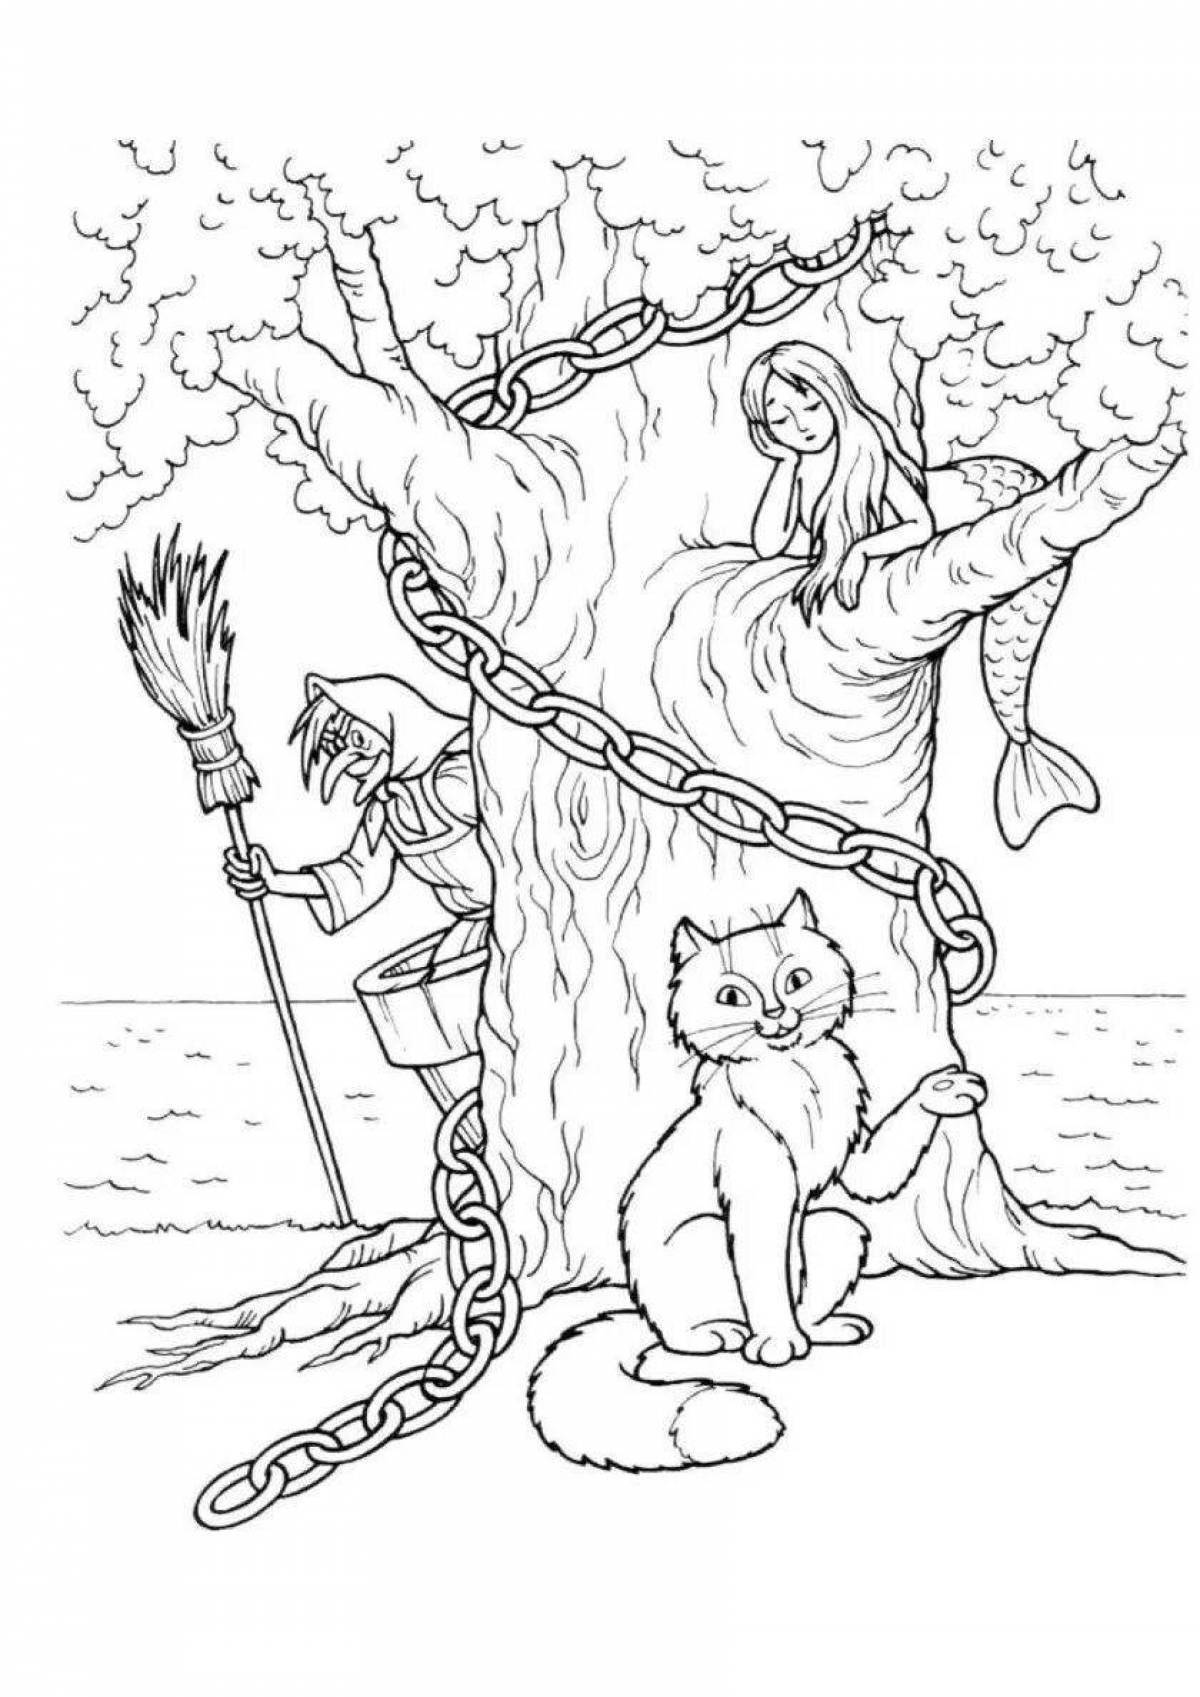 Delightful coloring book for children 4-5 years old based on Pushkin's fairy tales